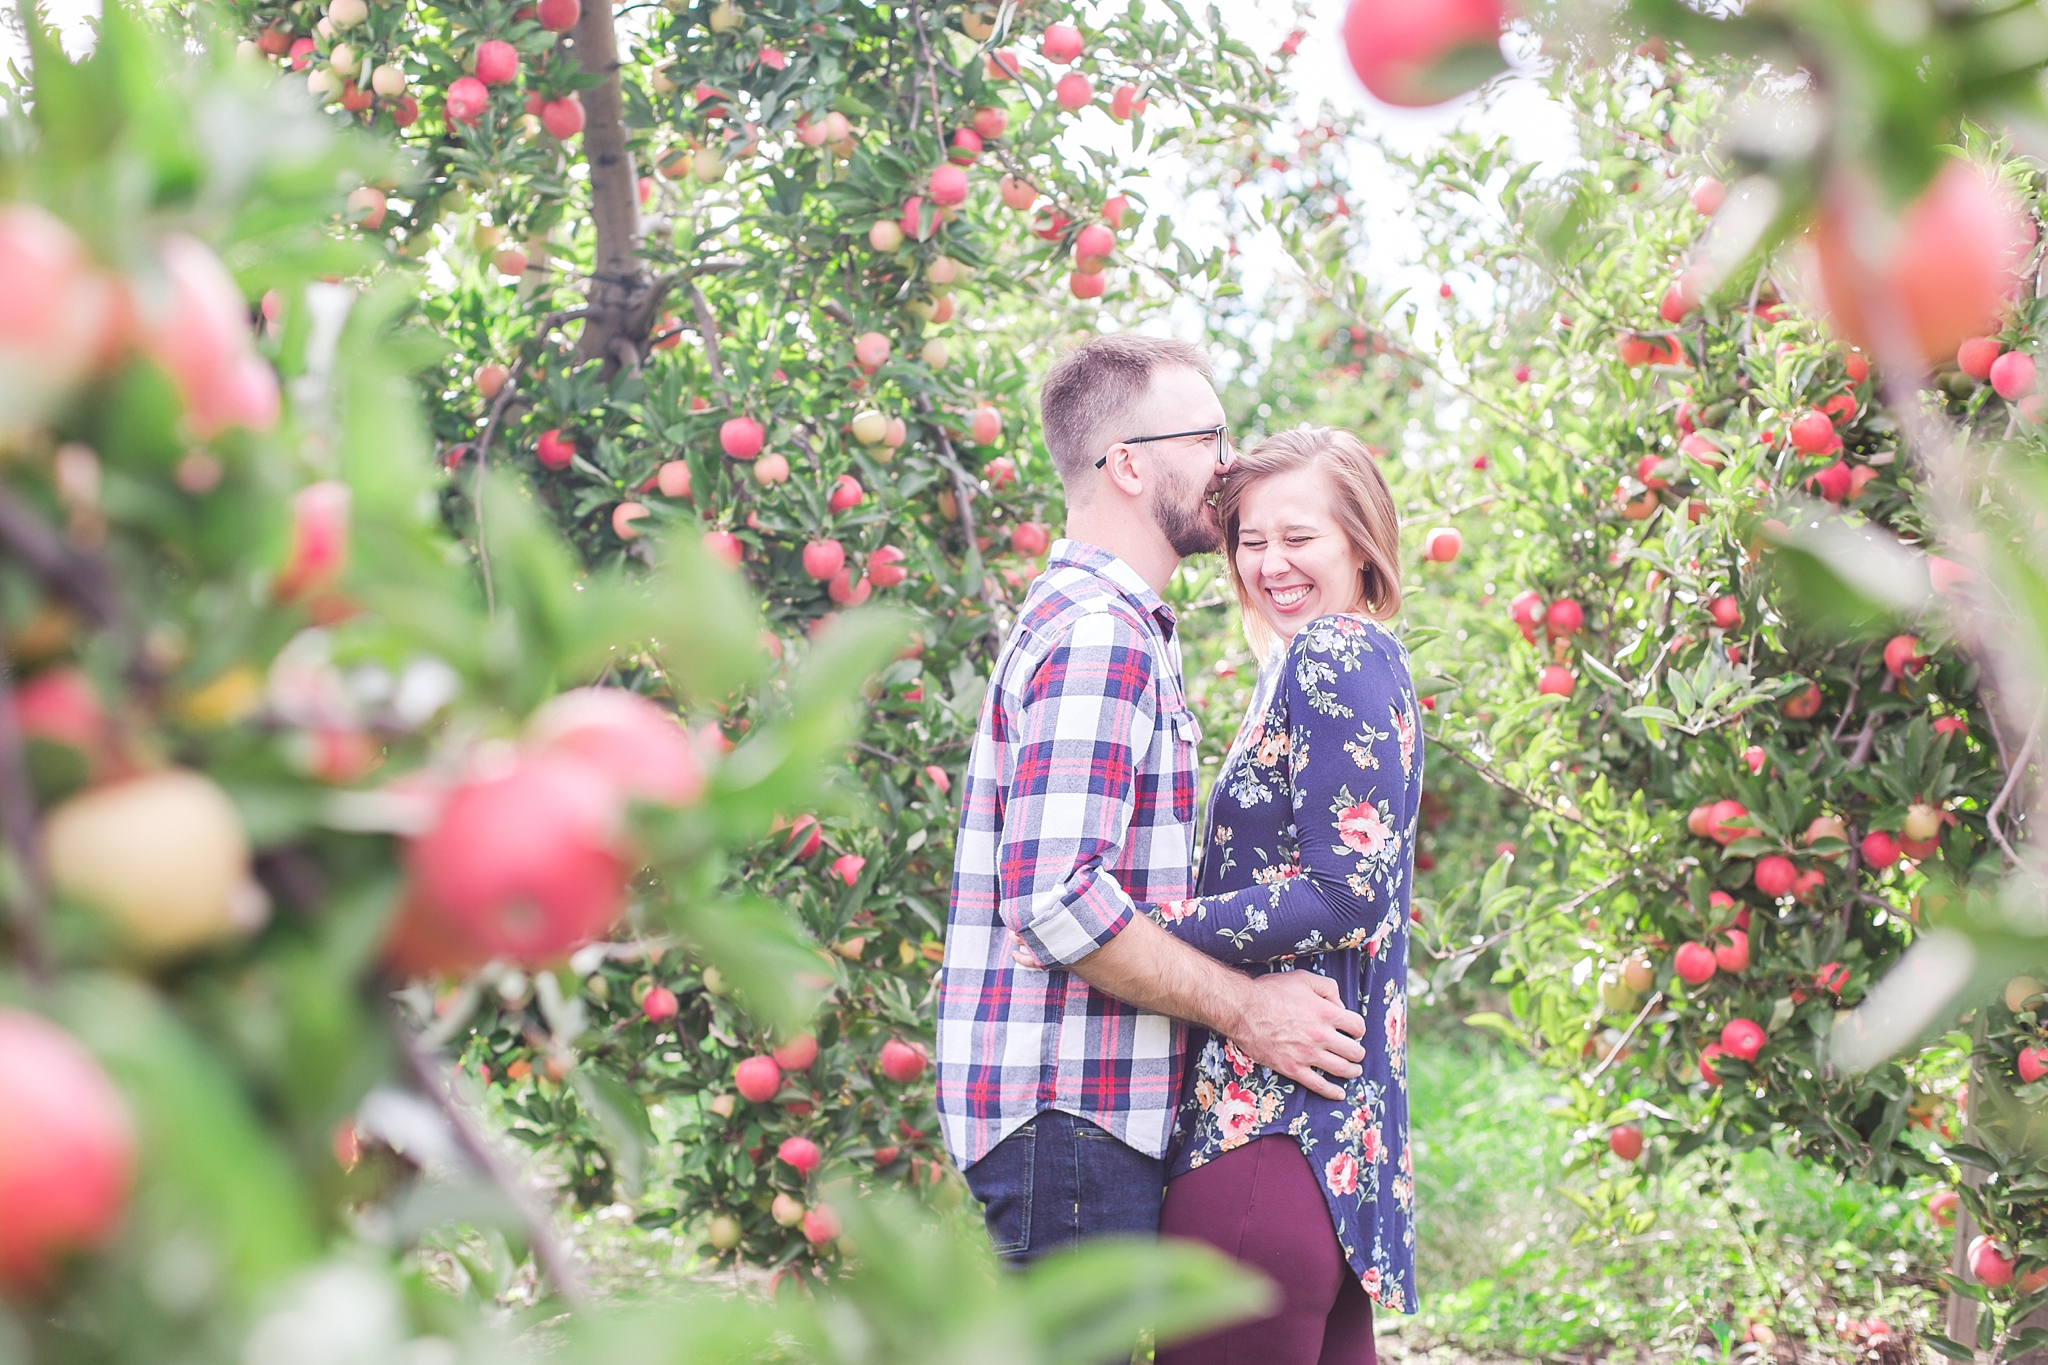 playful-fall-engagement-photos-at-hy's-cider-mill-ochard-in-bruce-township-michigan-by-courtney-carolyn-photography_0001.jpg